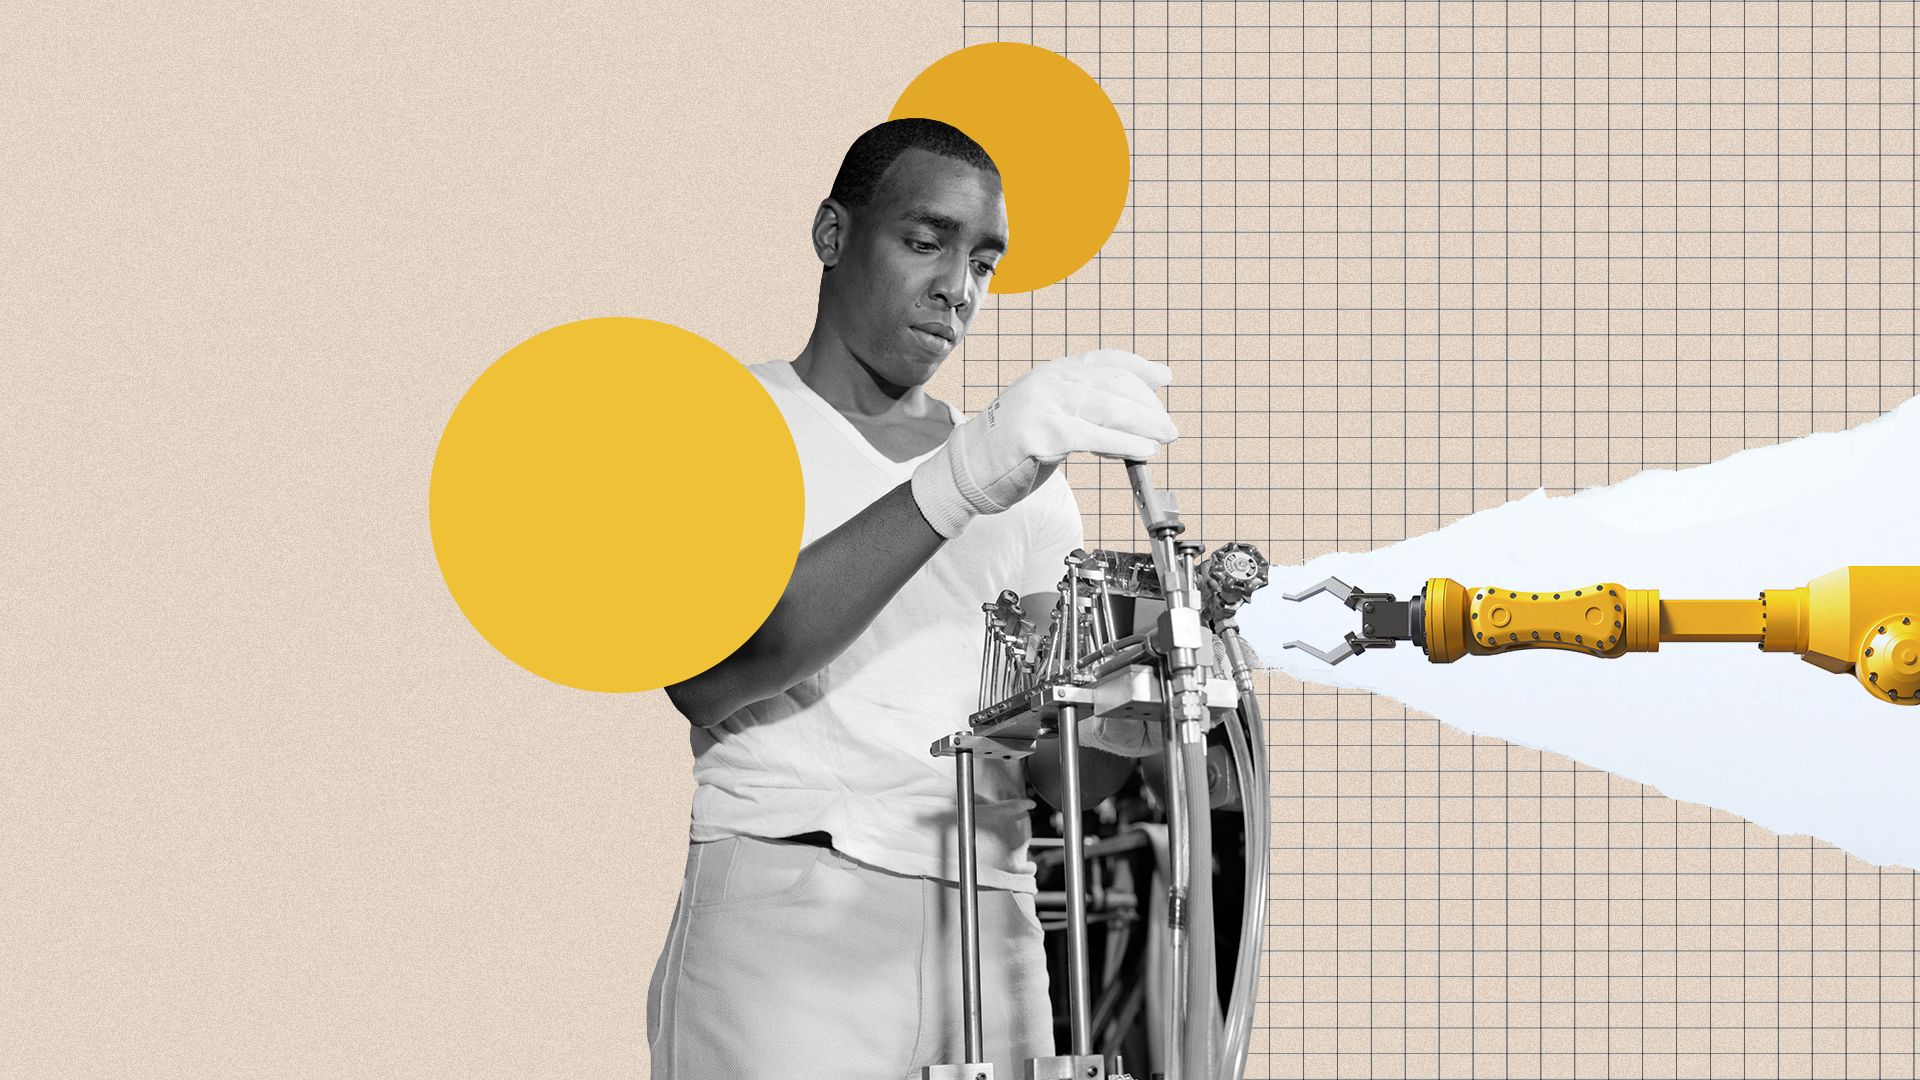 Photo illustration collage of an African American man working on a cathode ray tube machine with an automation arm reaching out towards him.